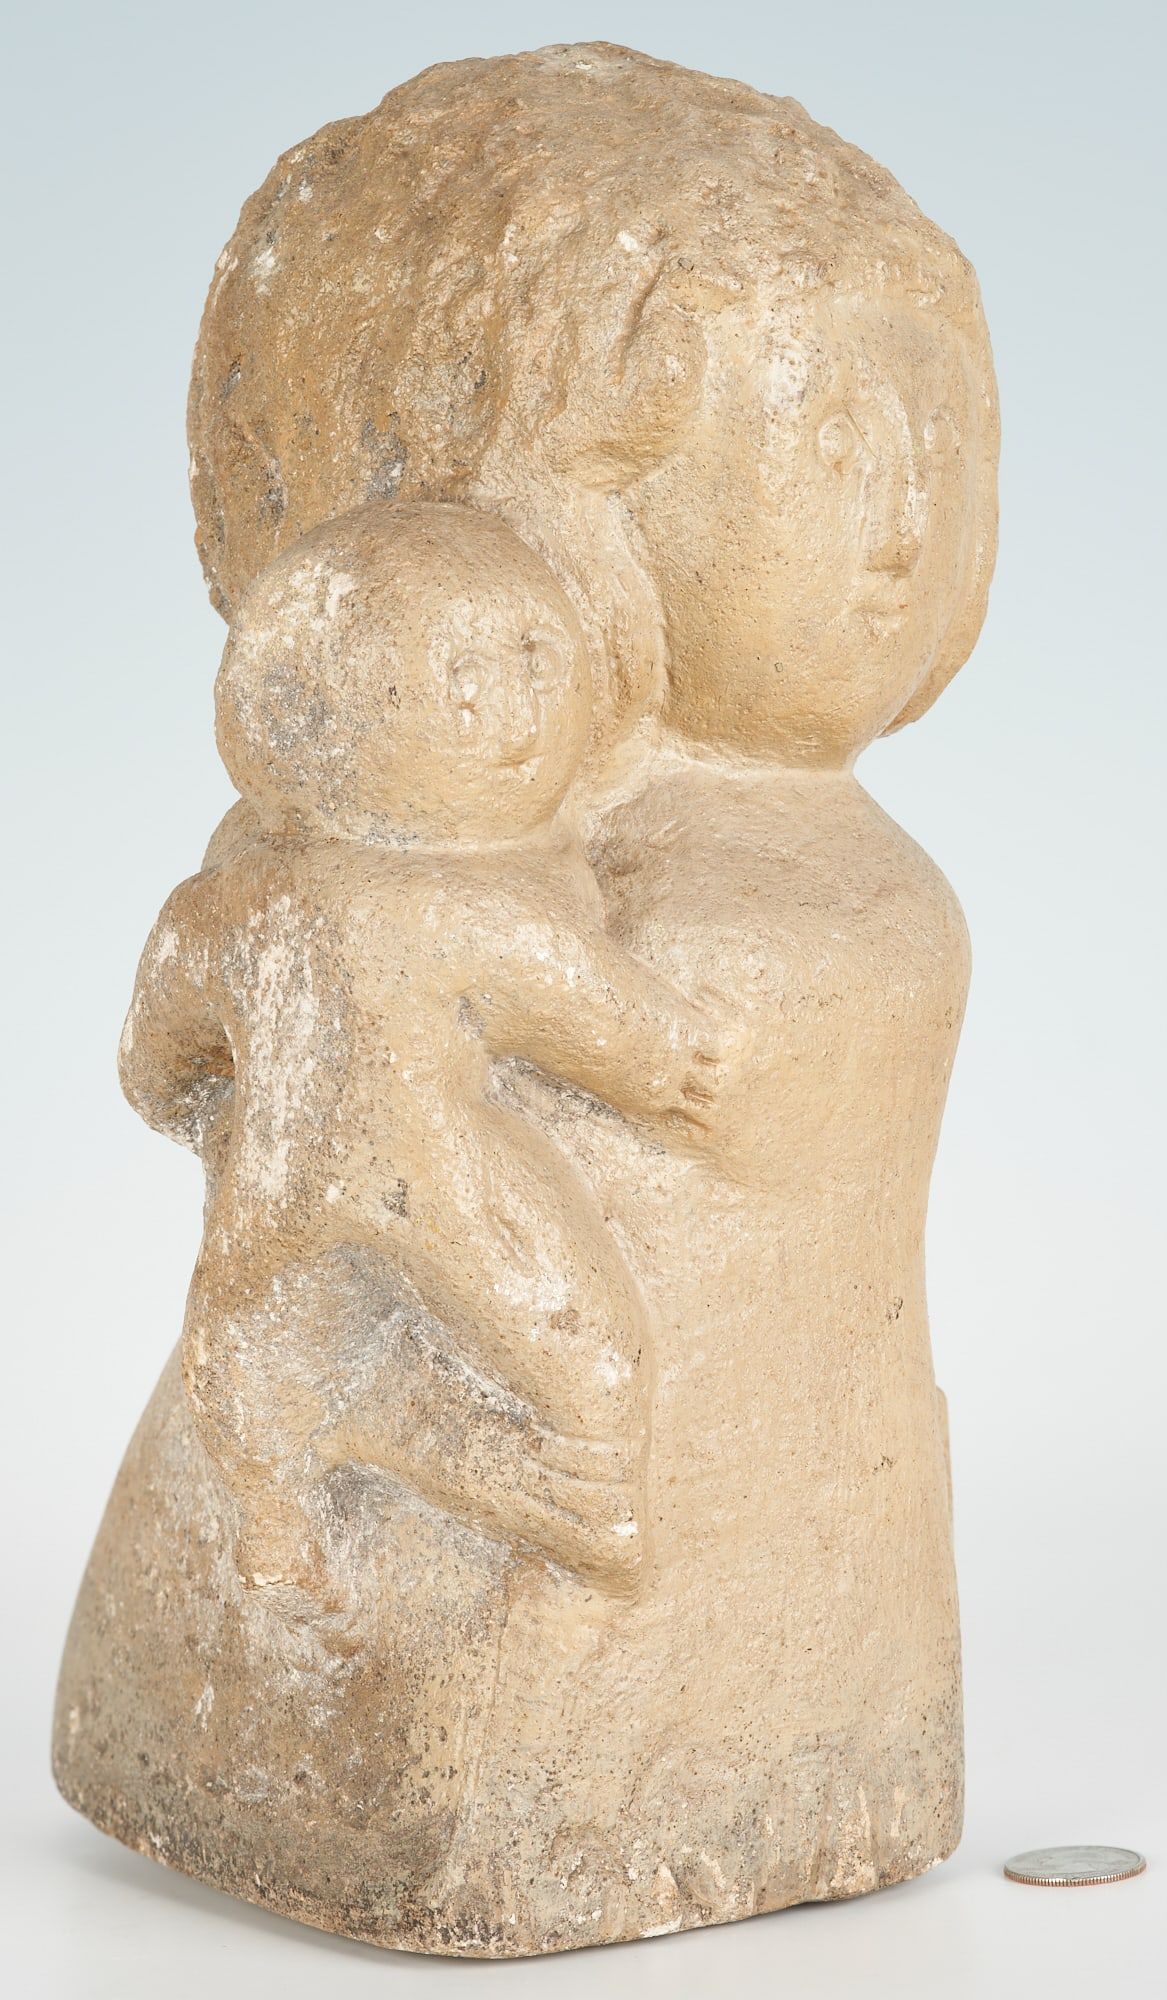 William Edmondson, ‘Mother and Child’, which sold for $122,000 with buyer’s premium at Case.